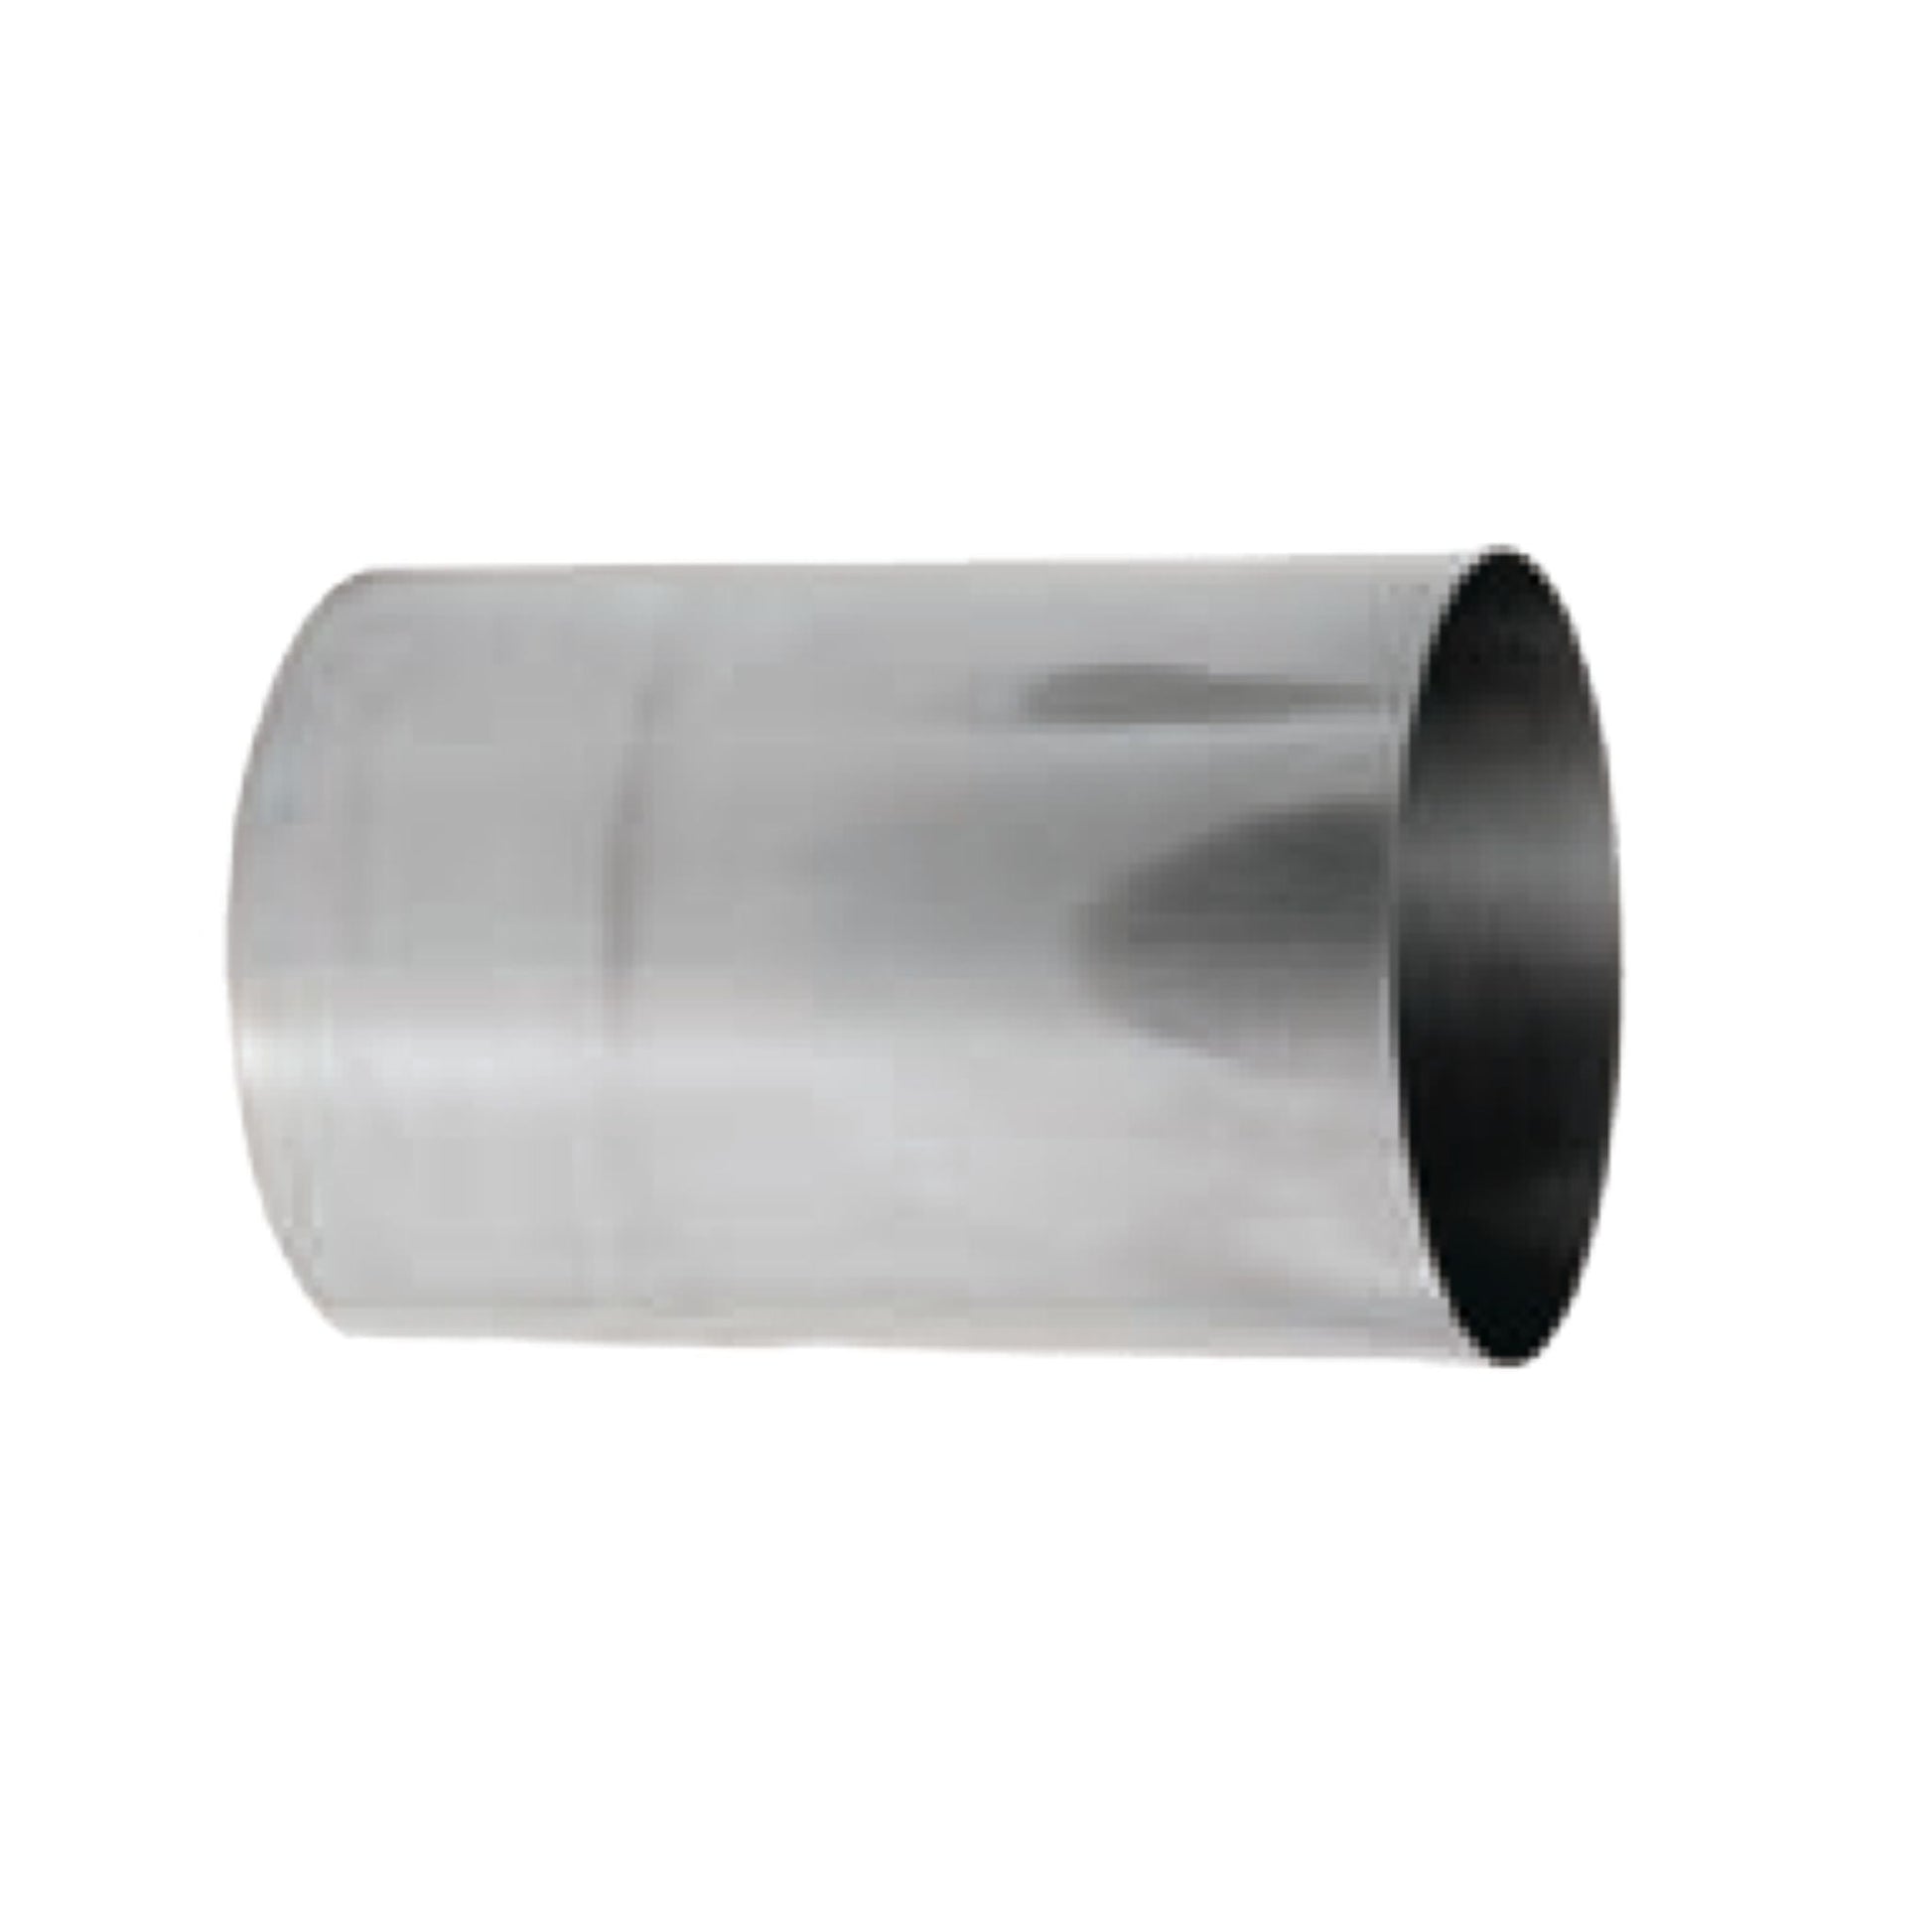 DuraVent FasNSeal 12" 29-4C Stainless Steel Wall Thimble Sleeve Extension